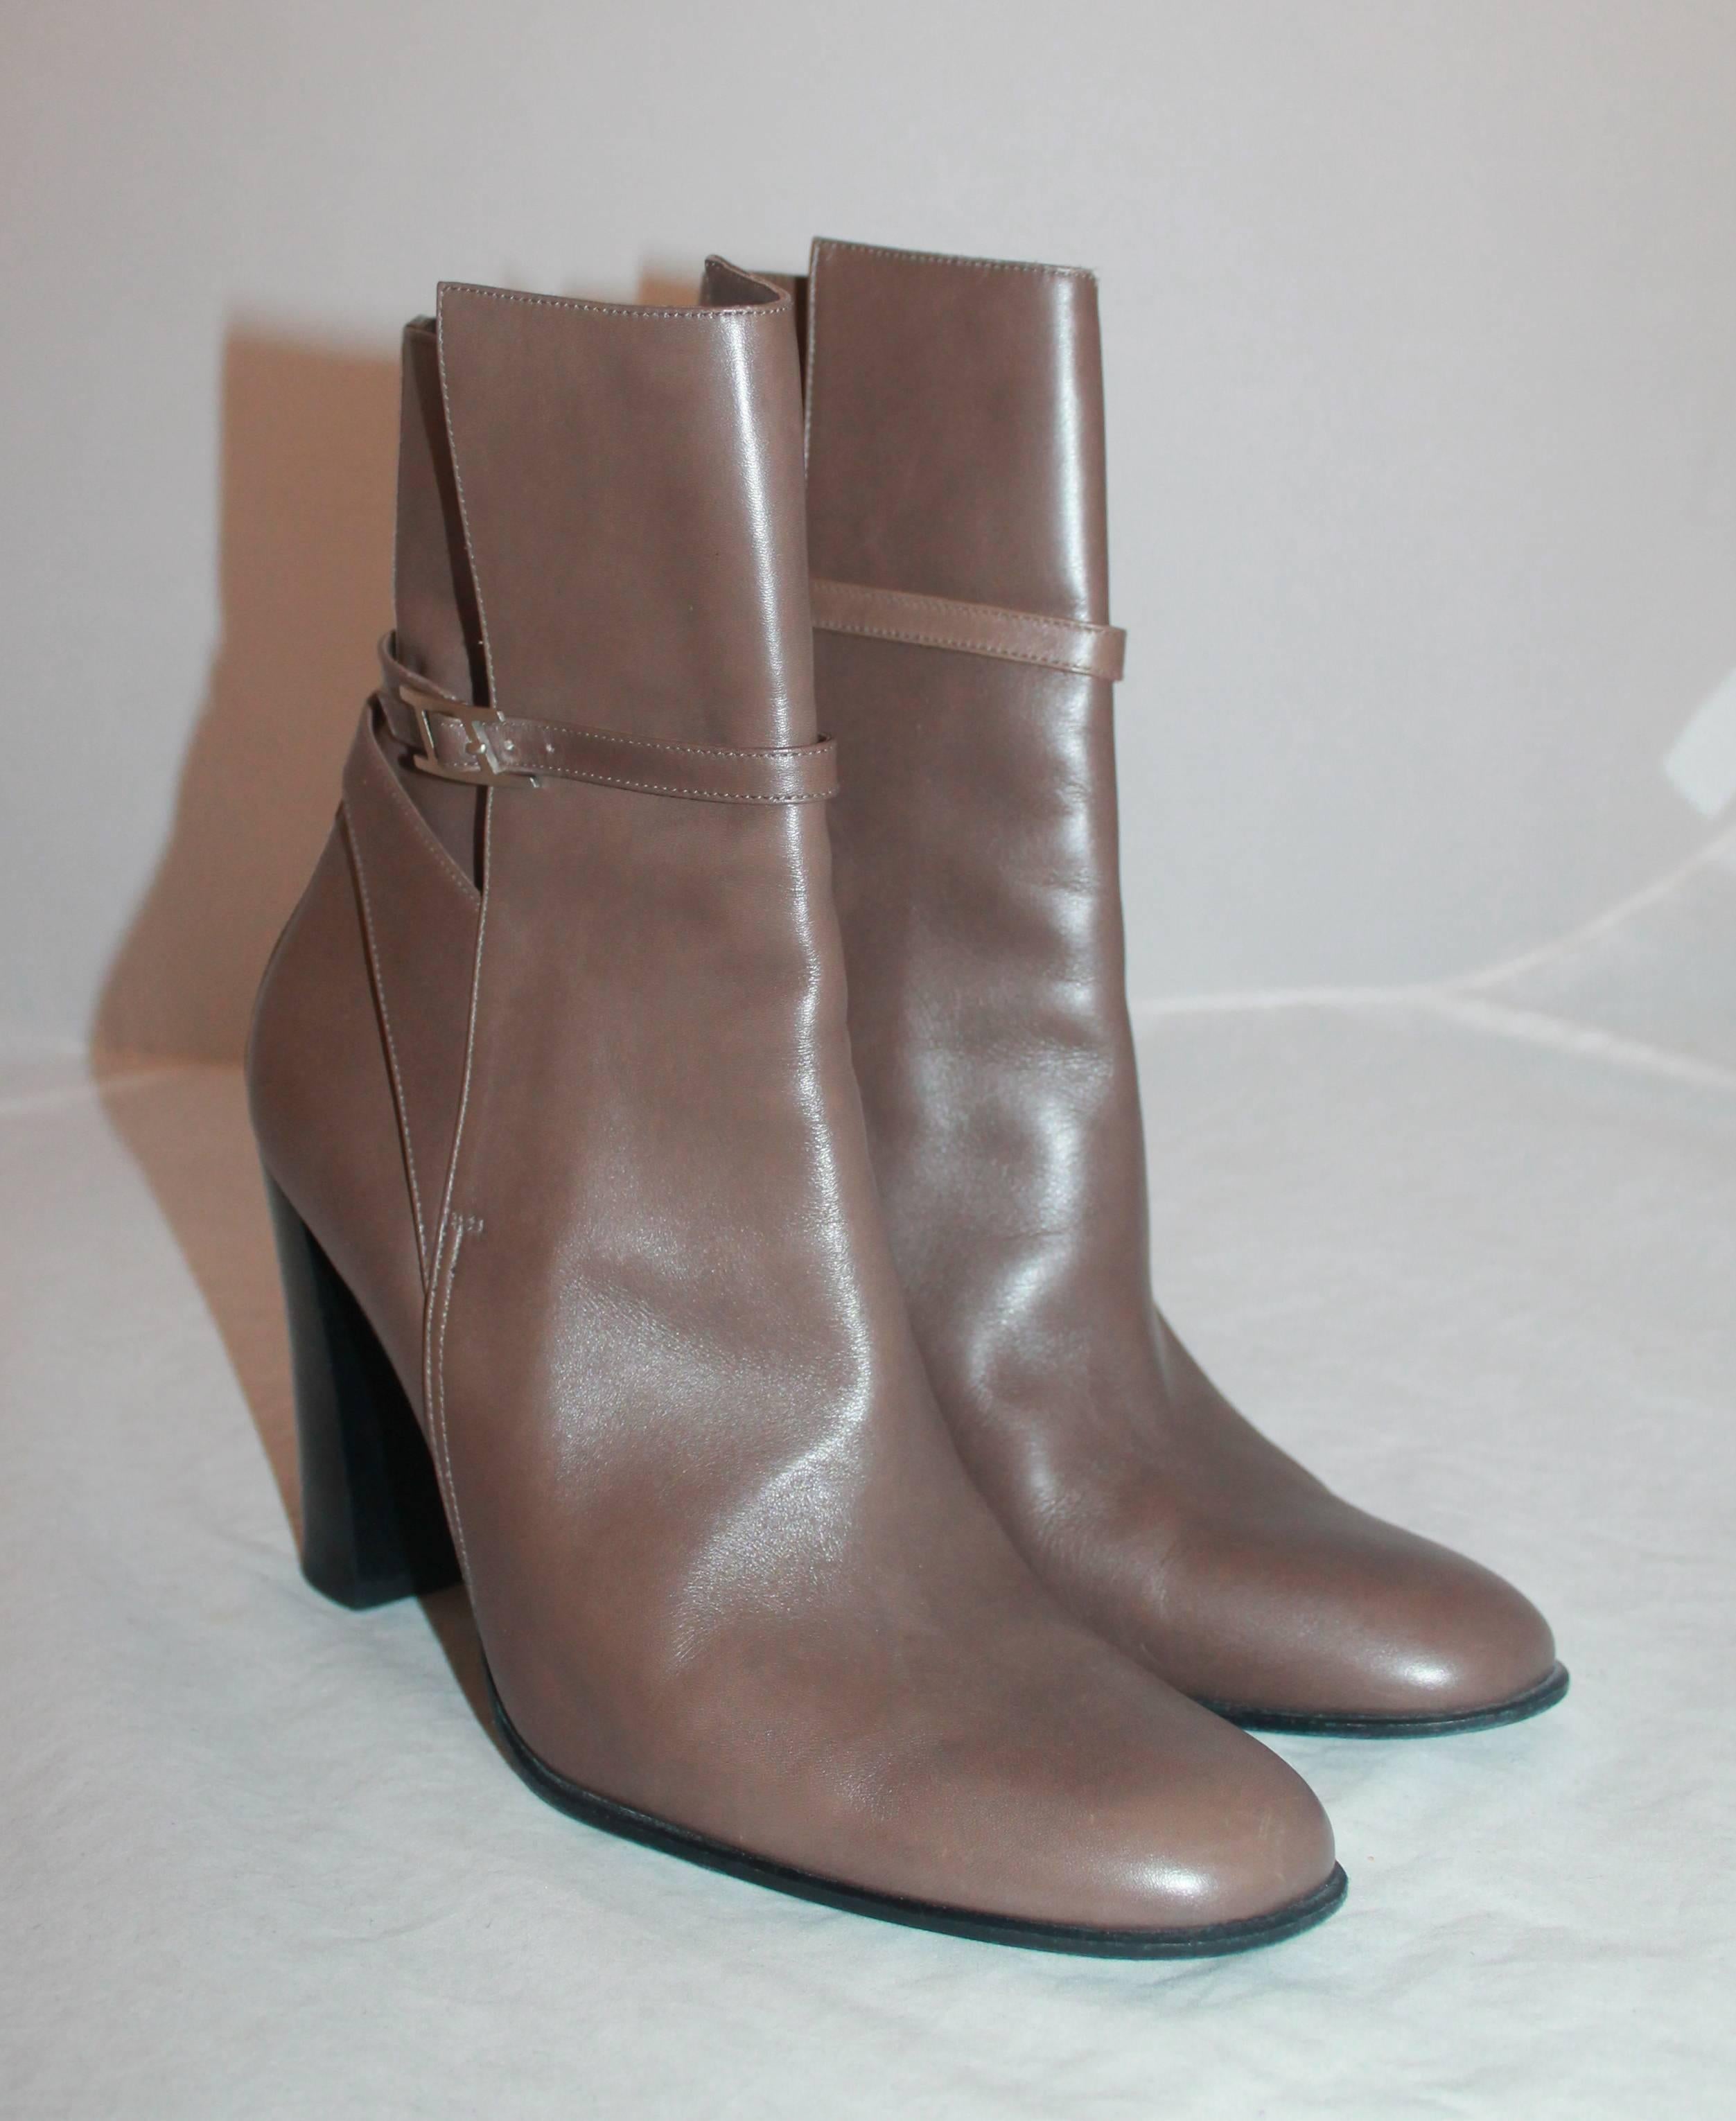 Hermes Taupe Leather Heeled Boots w/ Ankle Strap & Buckle - 39.  These beautiful Hermes boots are in very good condition with a slight scuffing at the top of the left boot.  They feature a gorgeous taupe leather, a layered appearance, and an ankle